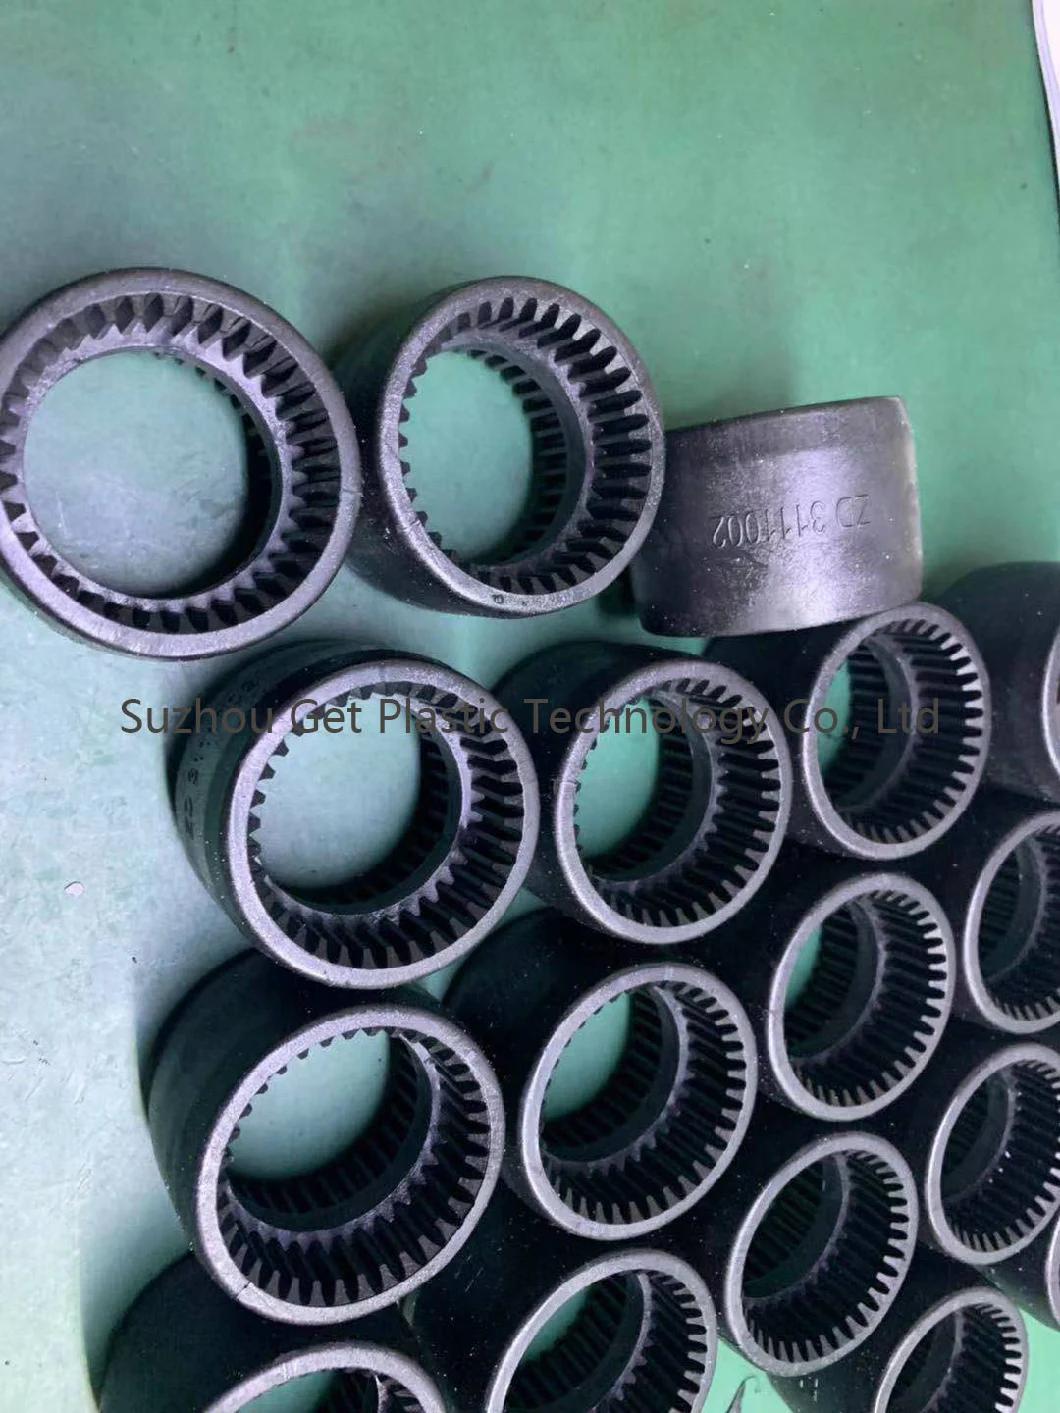 Good Auto Plastic Parts of Customized Injection Mould